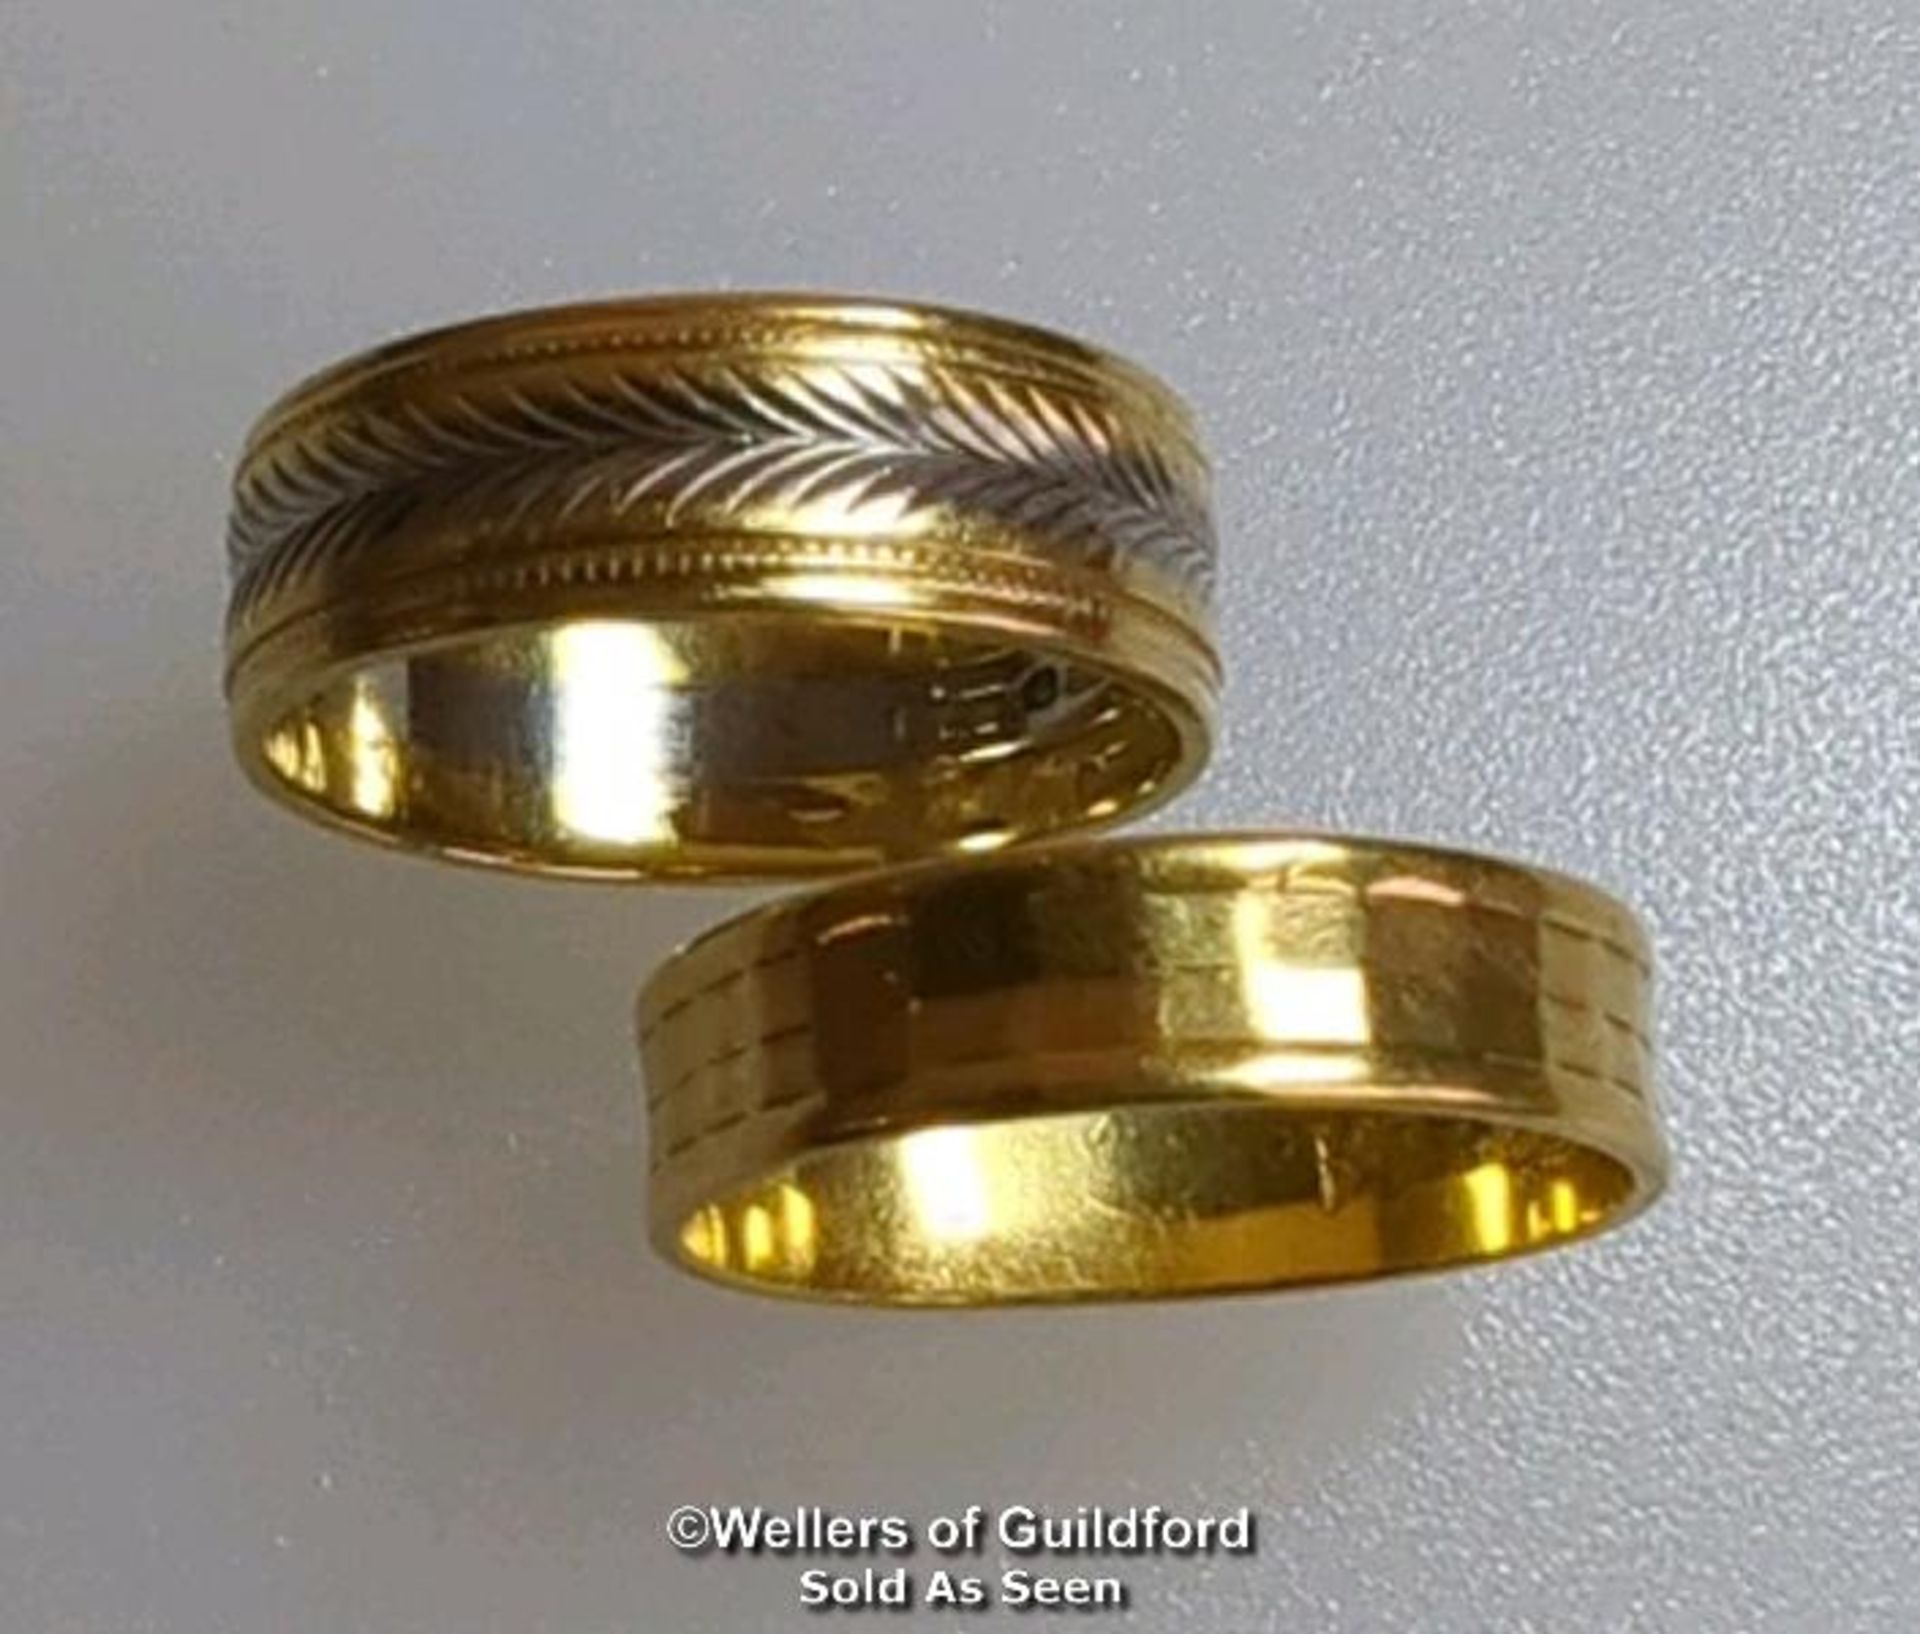 Two wedding bands. One hallmarked 22ct gold, London 1963, ring size M, gross weight 2.81g. The other